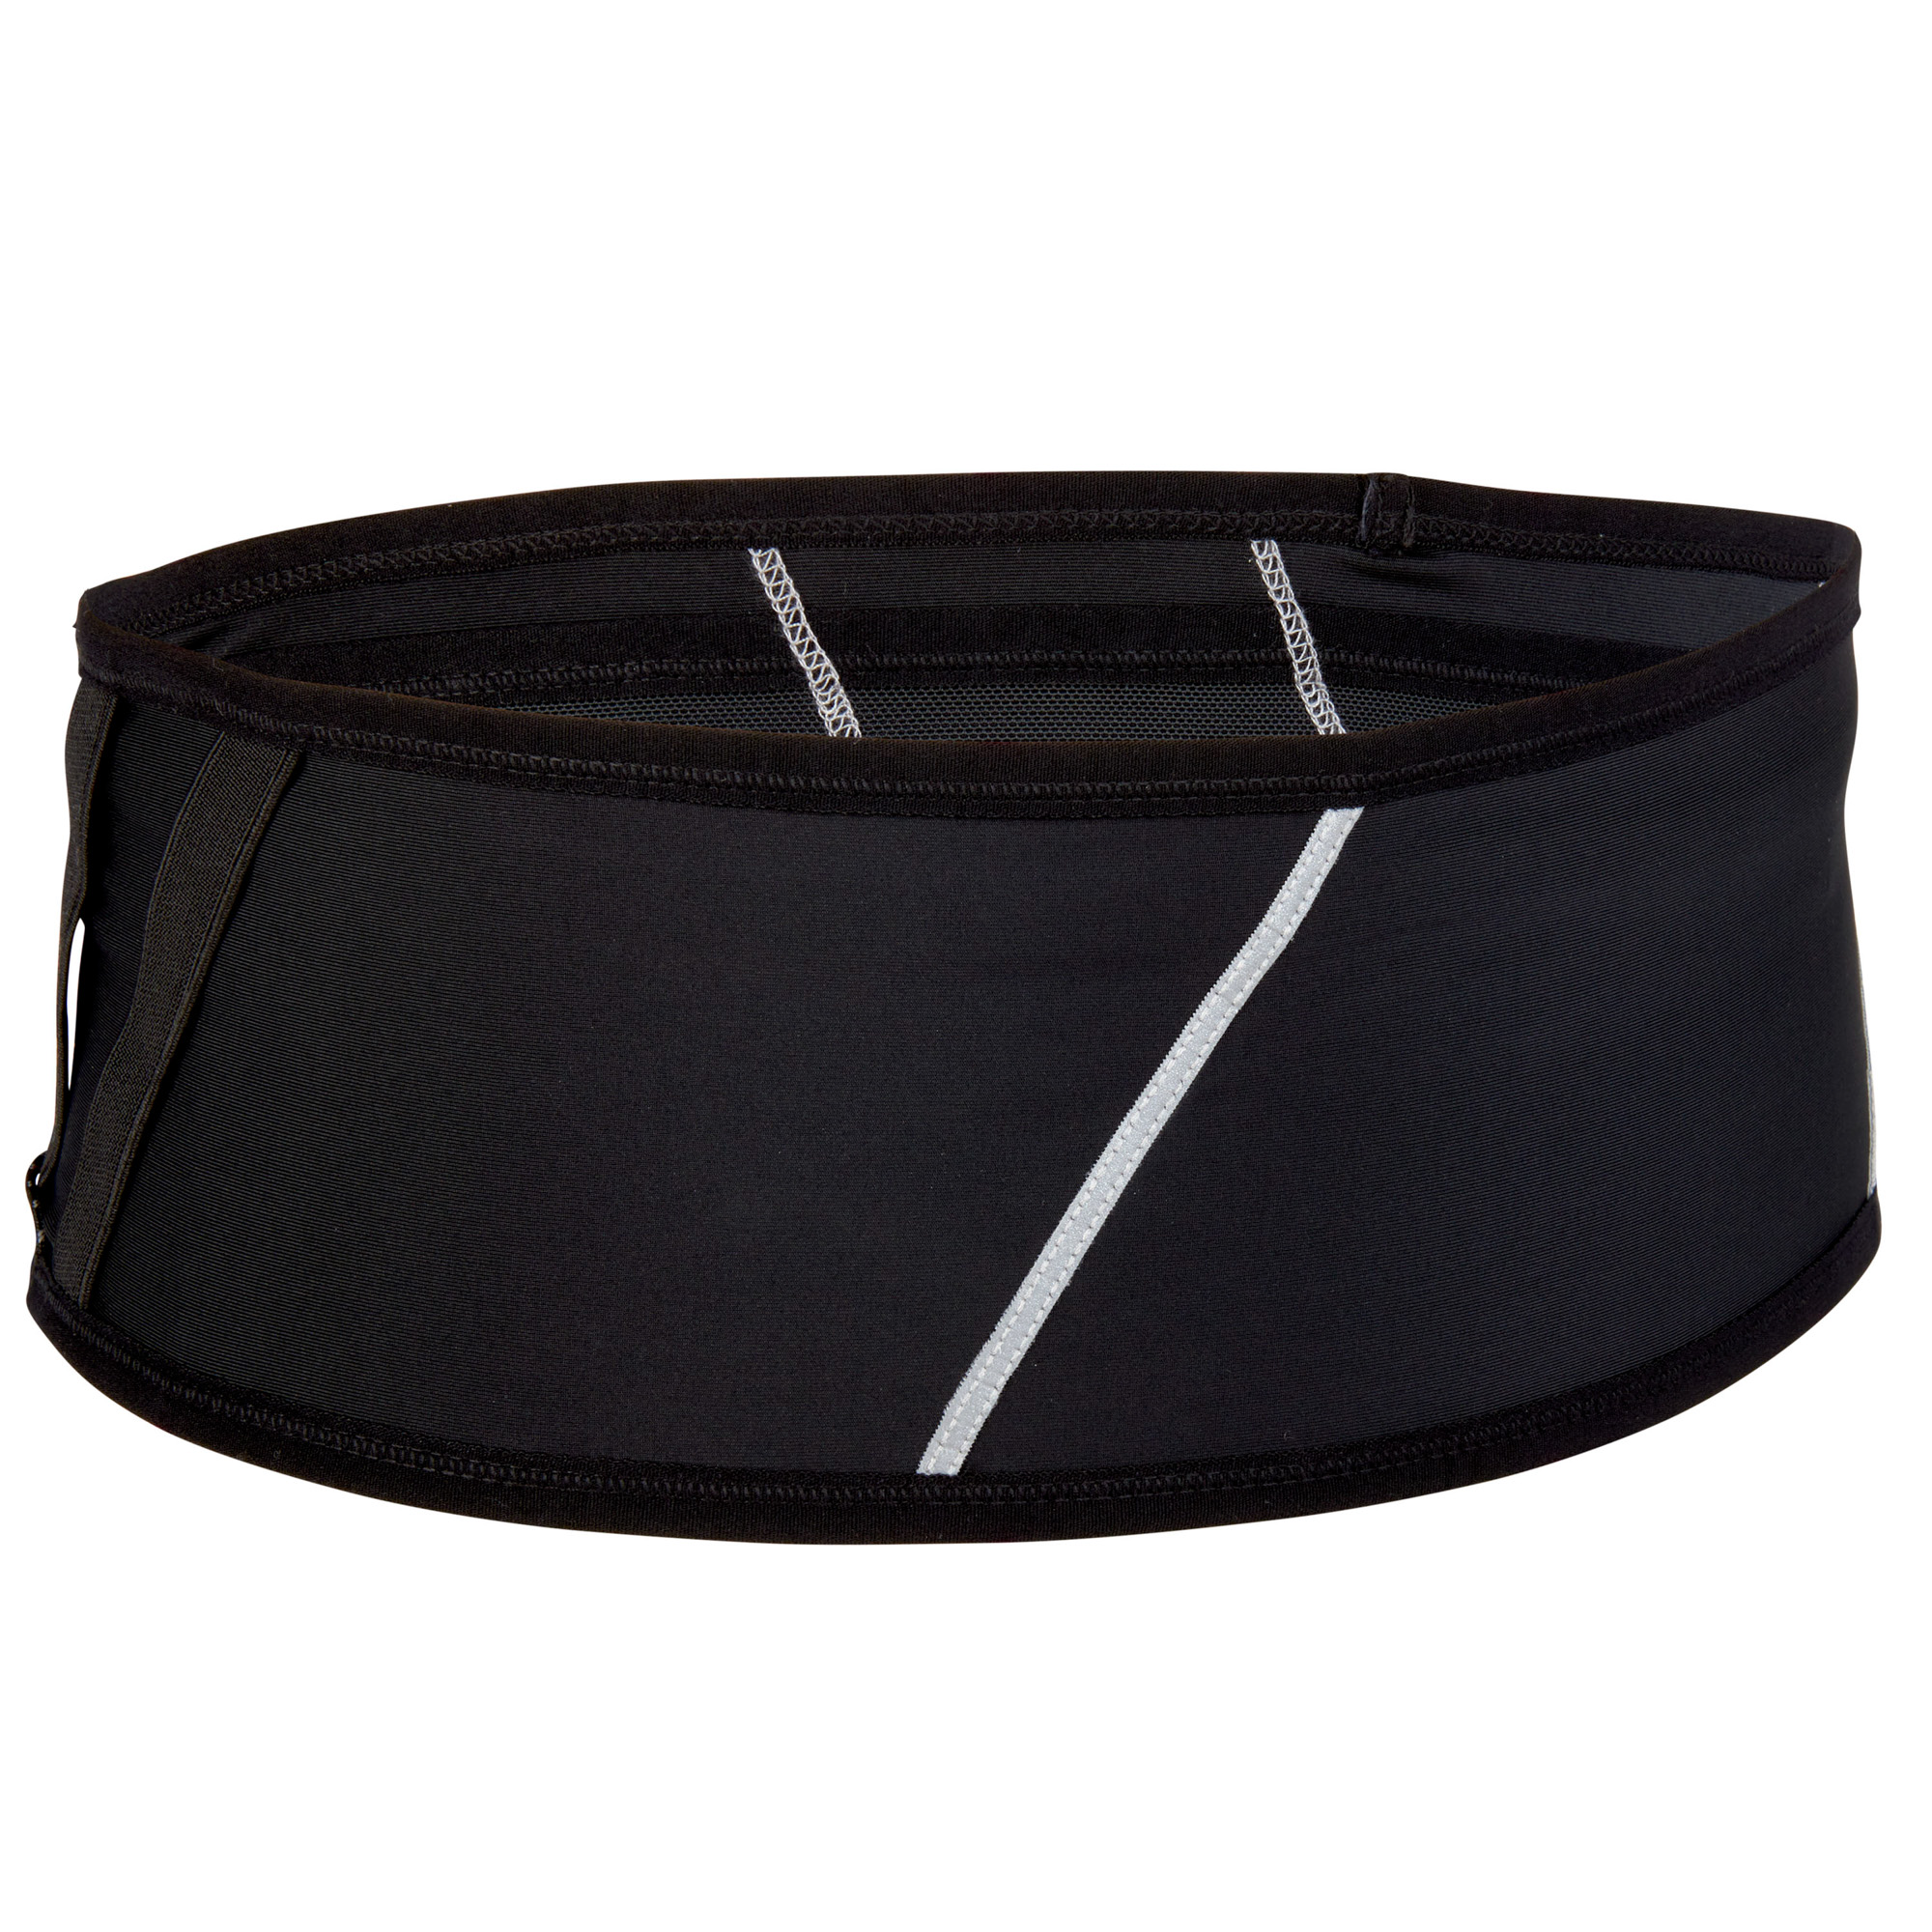 Ultimate Direction Comfort Belt - Prior Year in Black Size XL